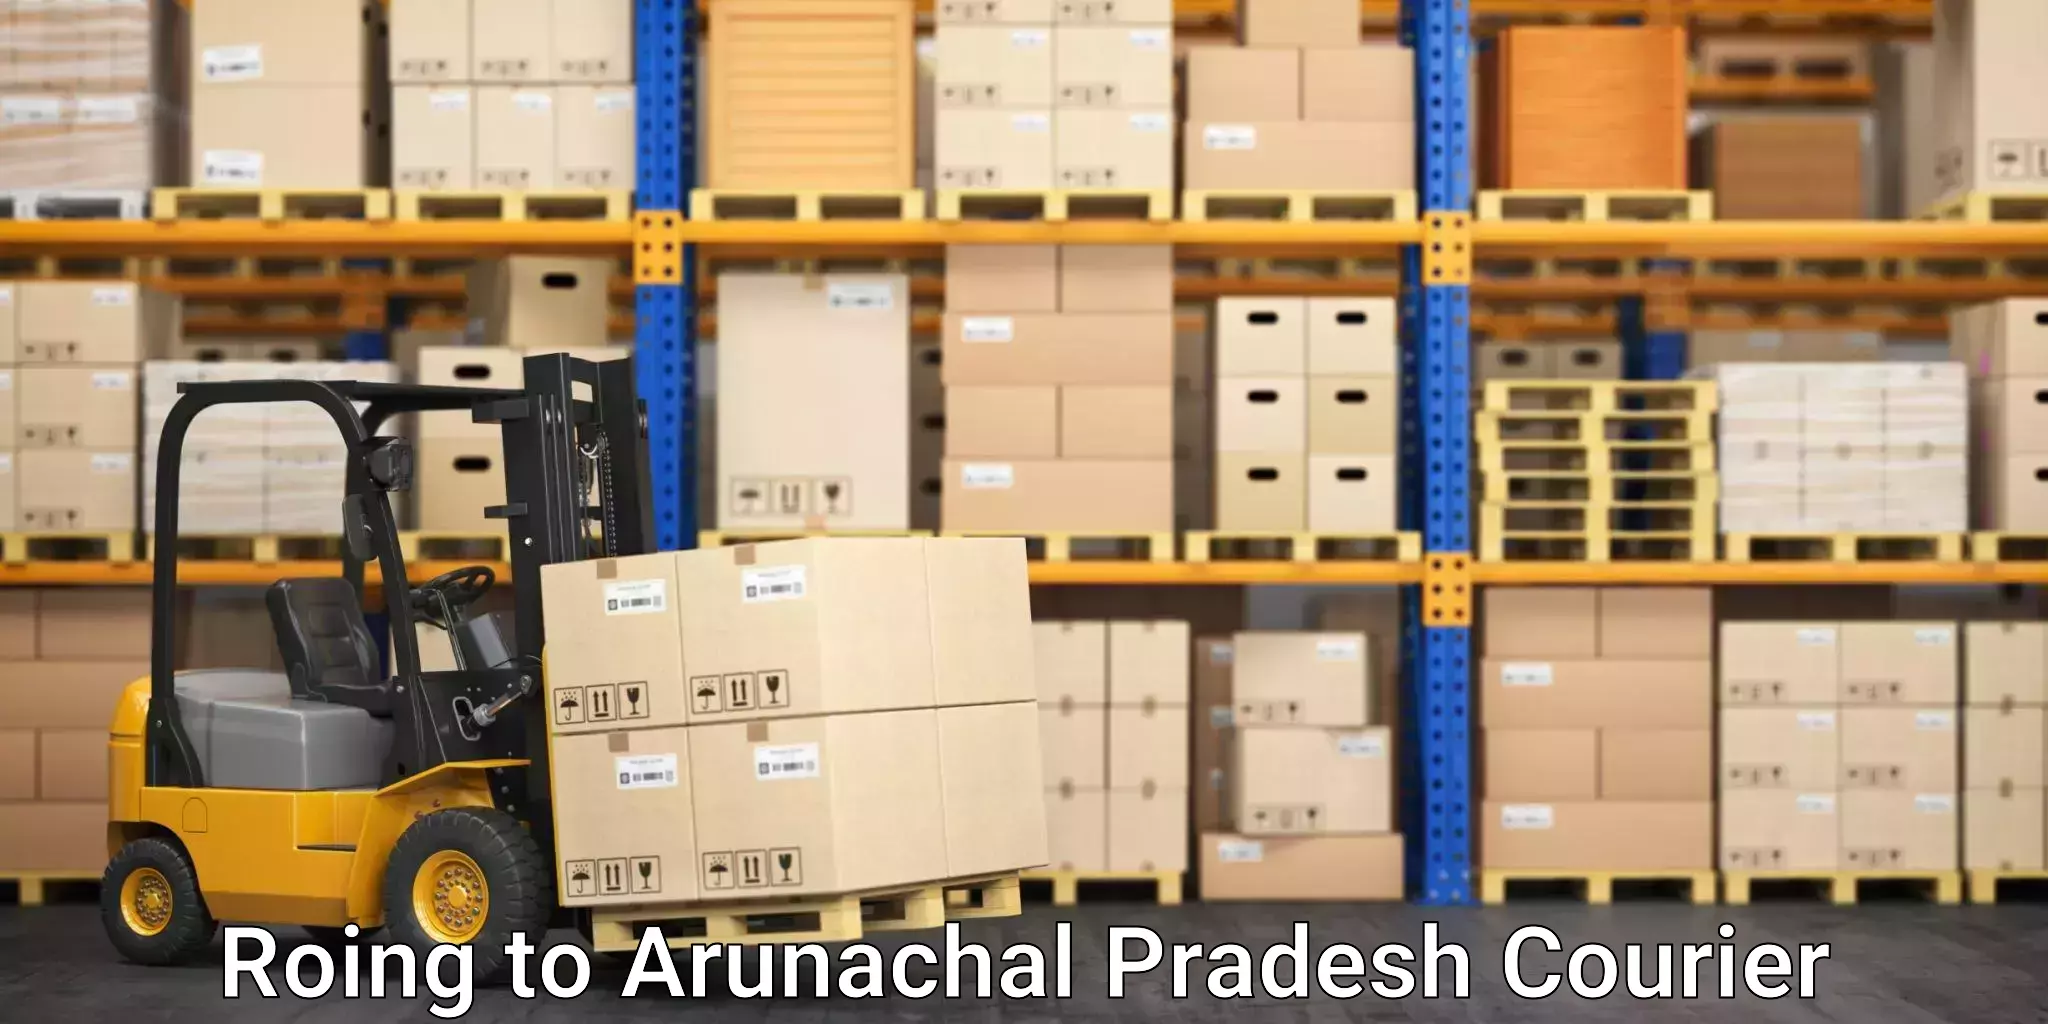 Corporate courier solutions Roing to Arunachal Pradesh